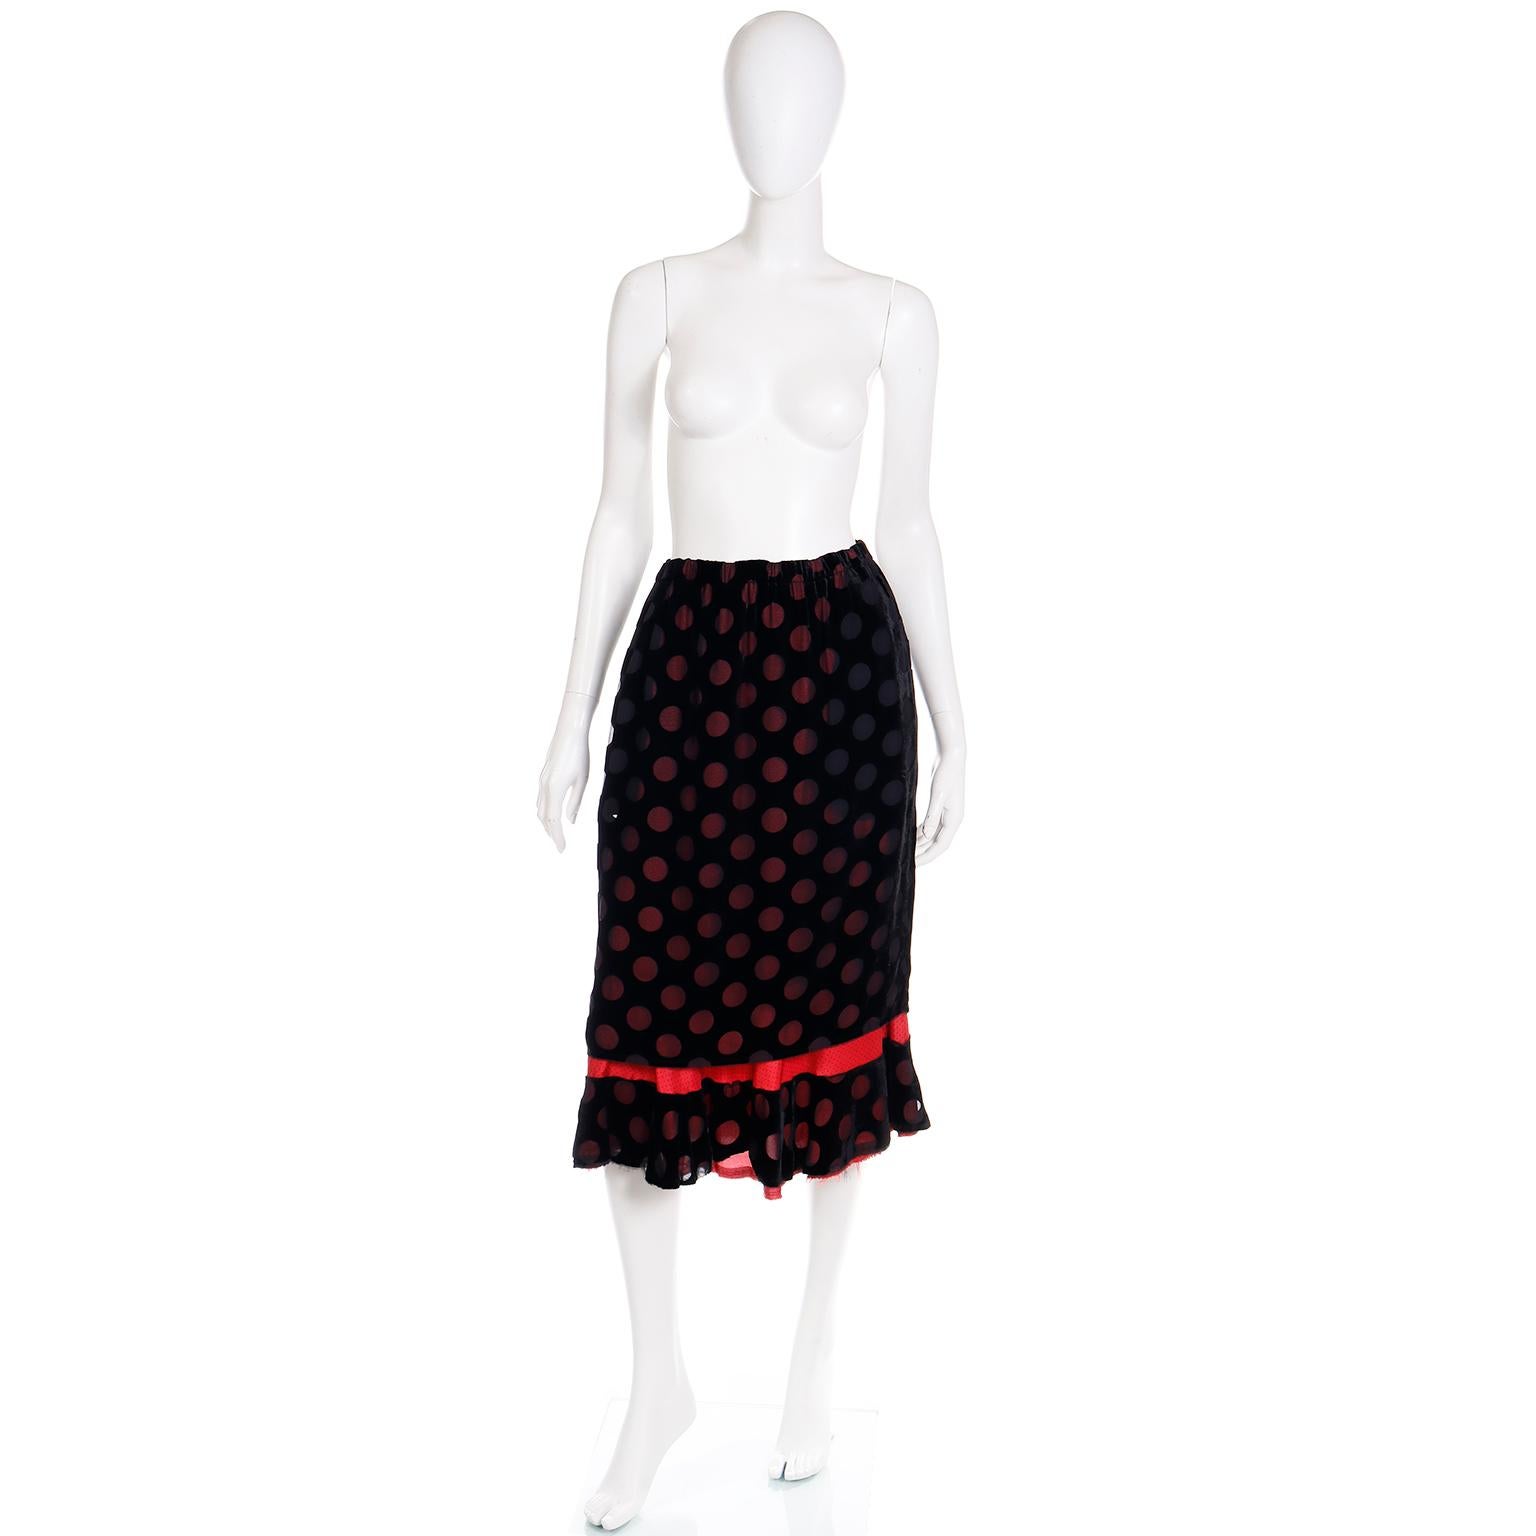 This is a fun, playful vintage Comme des Garcons skirt  in a black rayon silk blend with red and black polka dotted lining.
The top fabric has an almost velvet appearance with transparent fabric circles revealing the red and black polka dot lining.